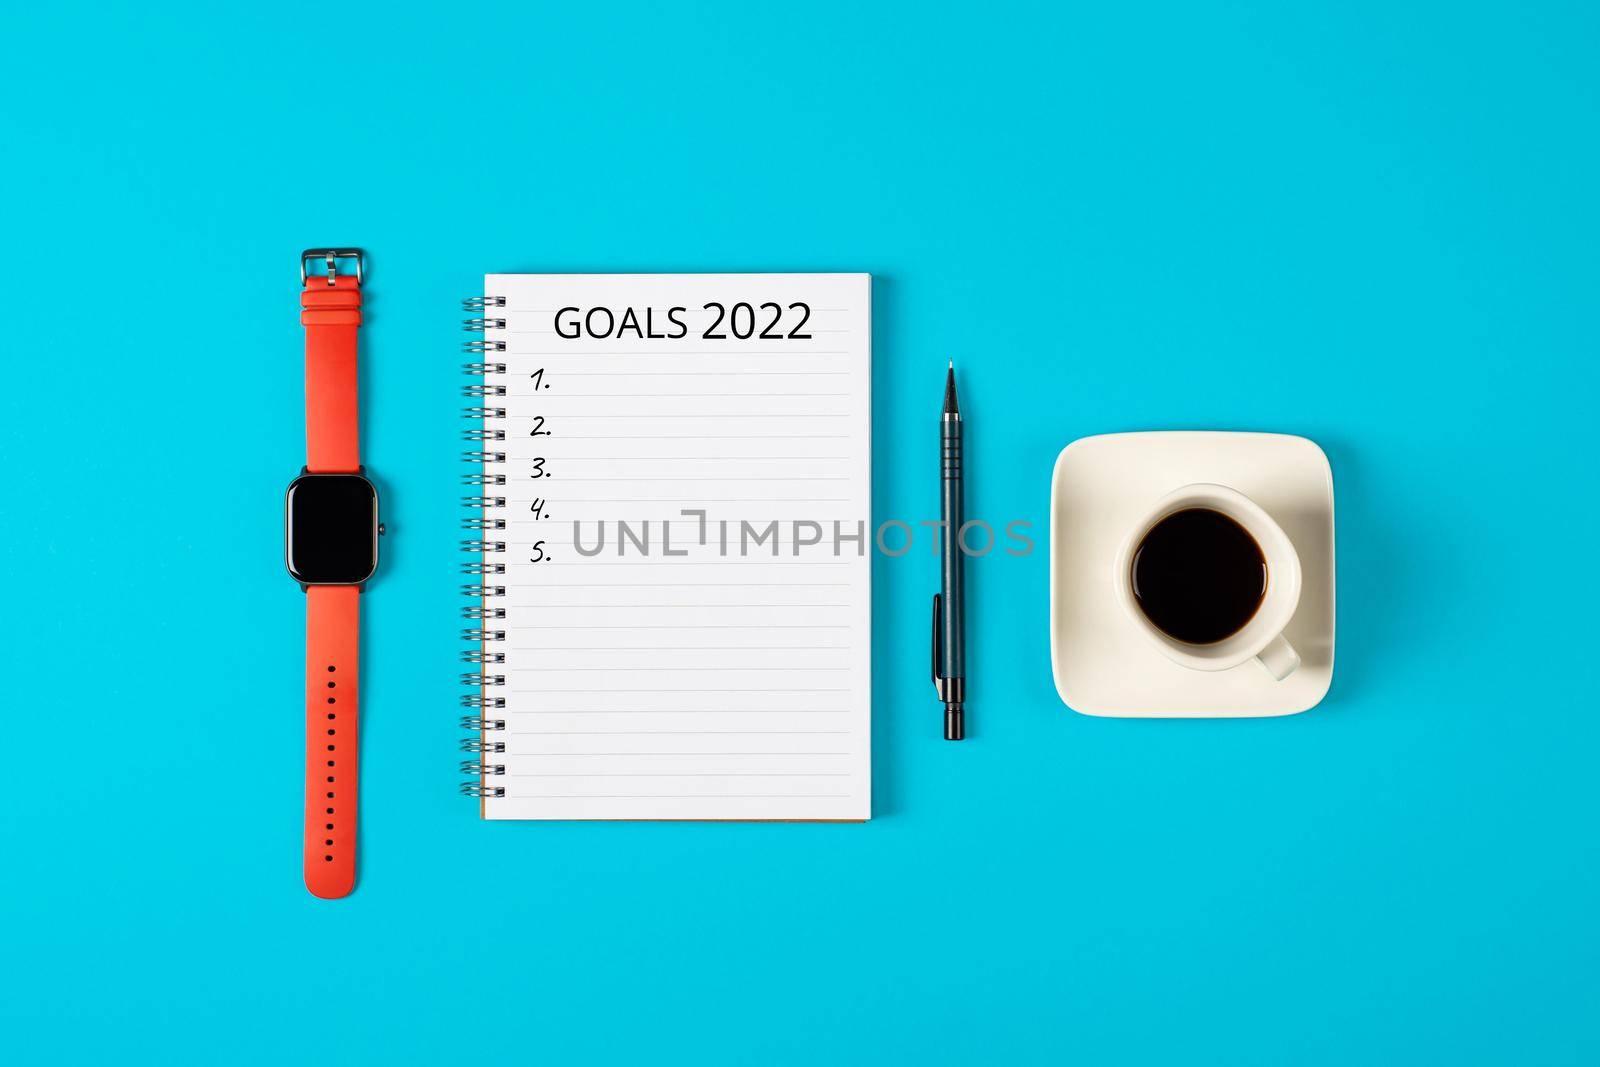 2022 goals concept banner. Notebook, watch, pencil and a cup of black coffee isolated on blue background